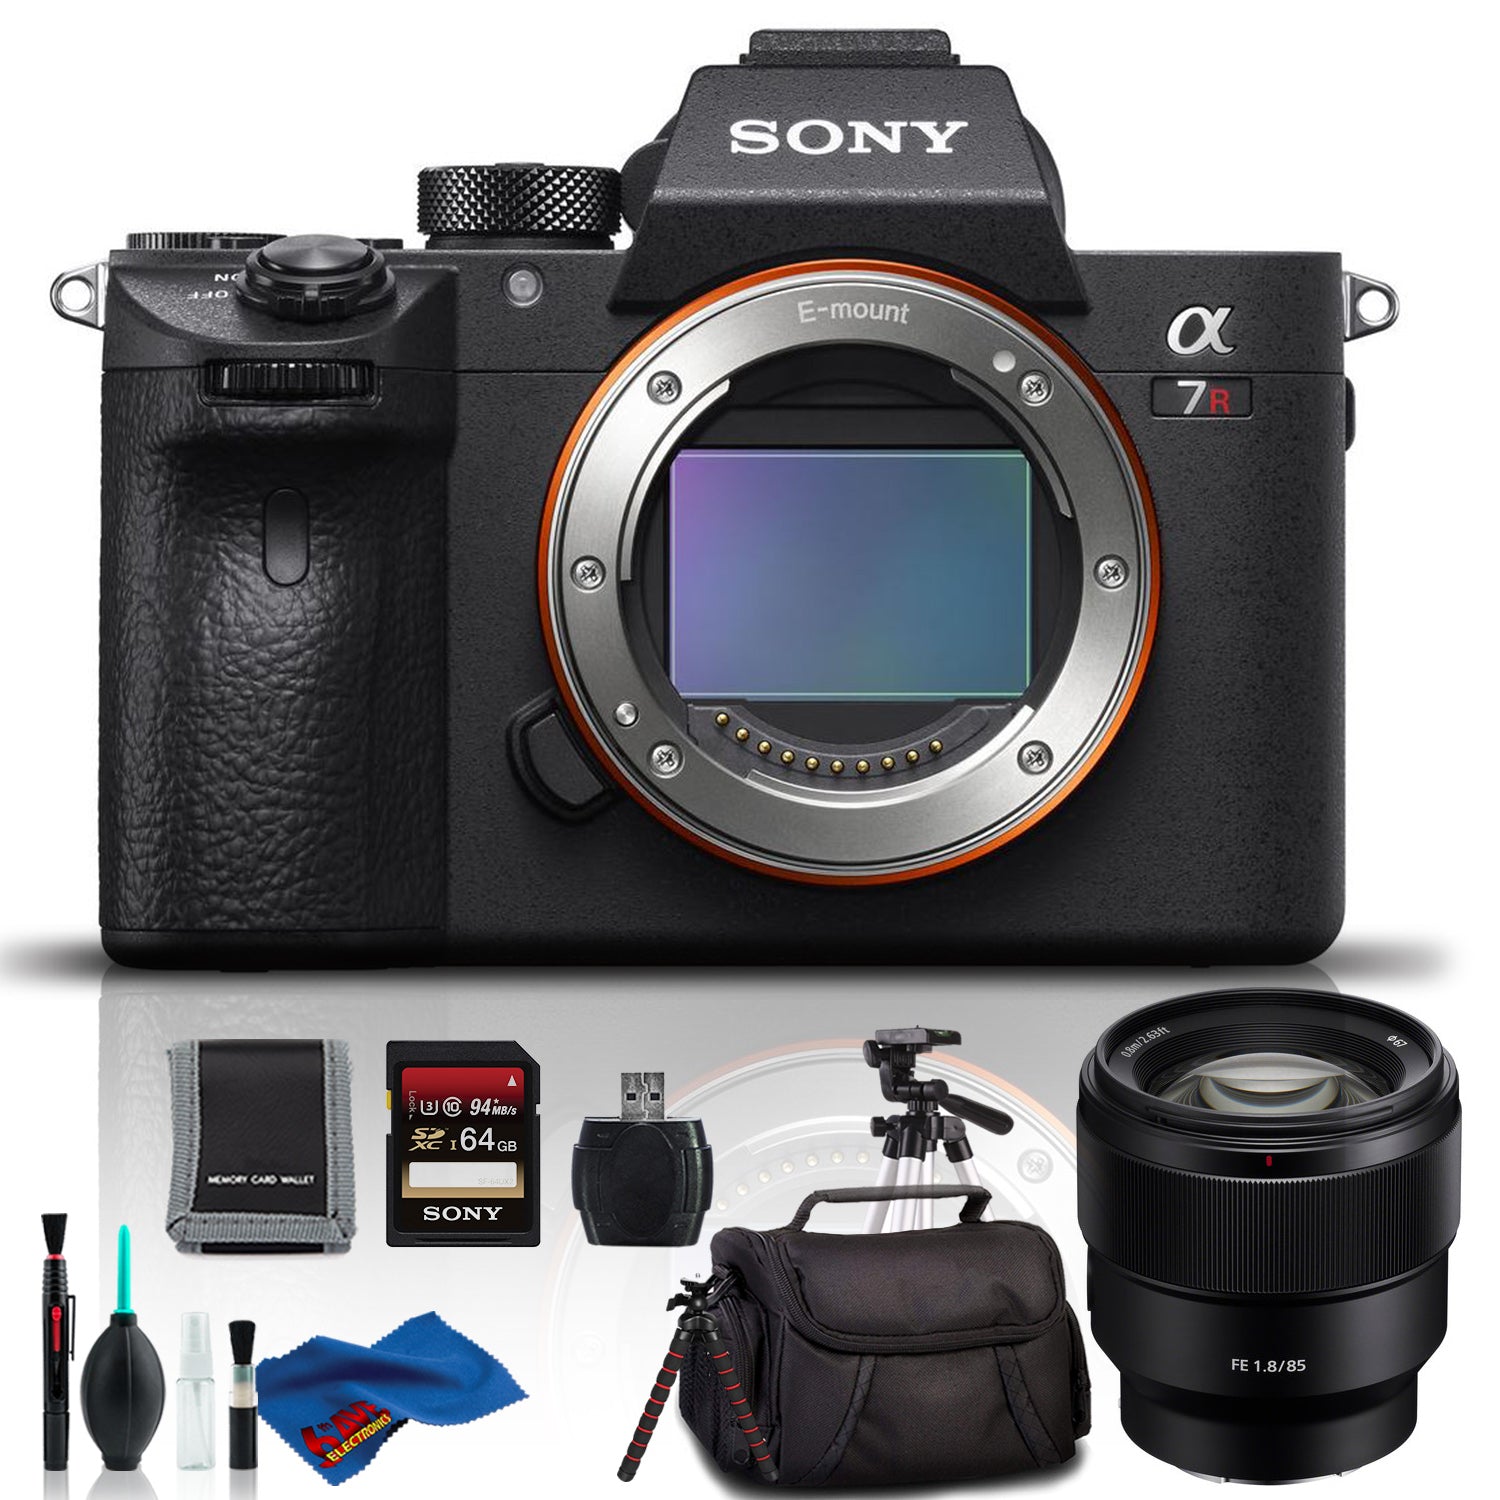 Sony Alpha a7R III Mirrorless Digital Camera with 85mm Lens - Deluxe Kit